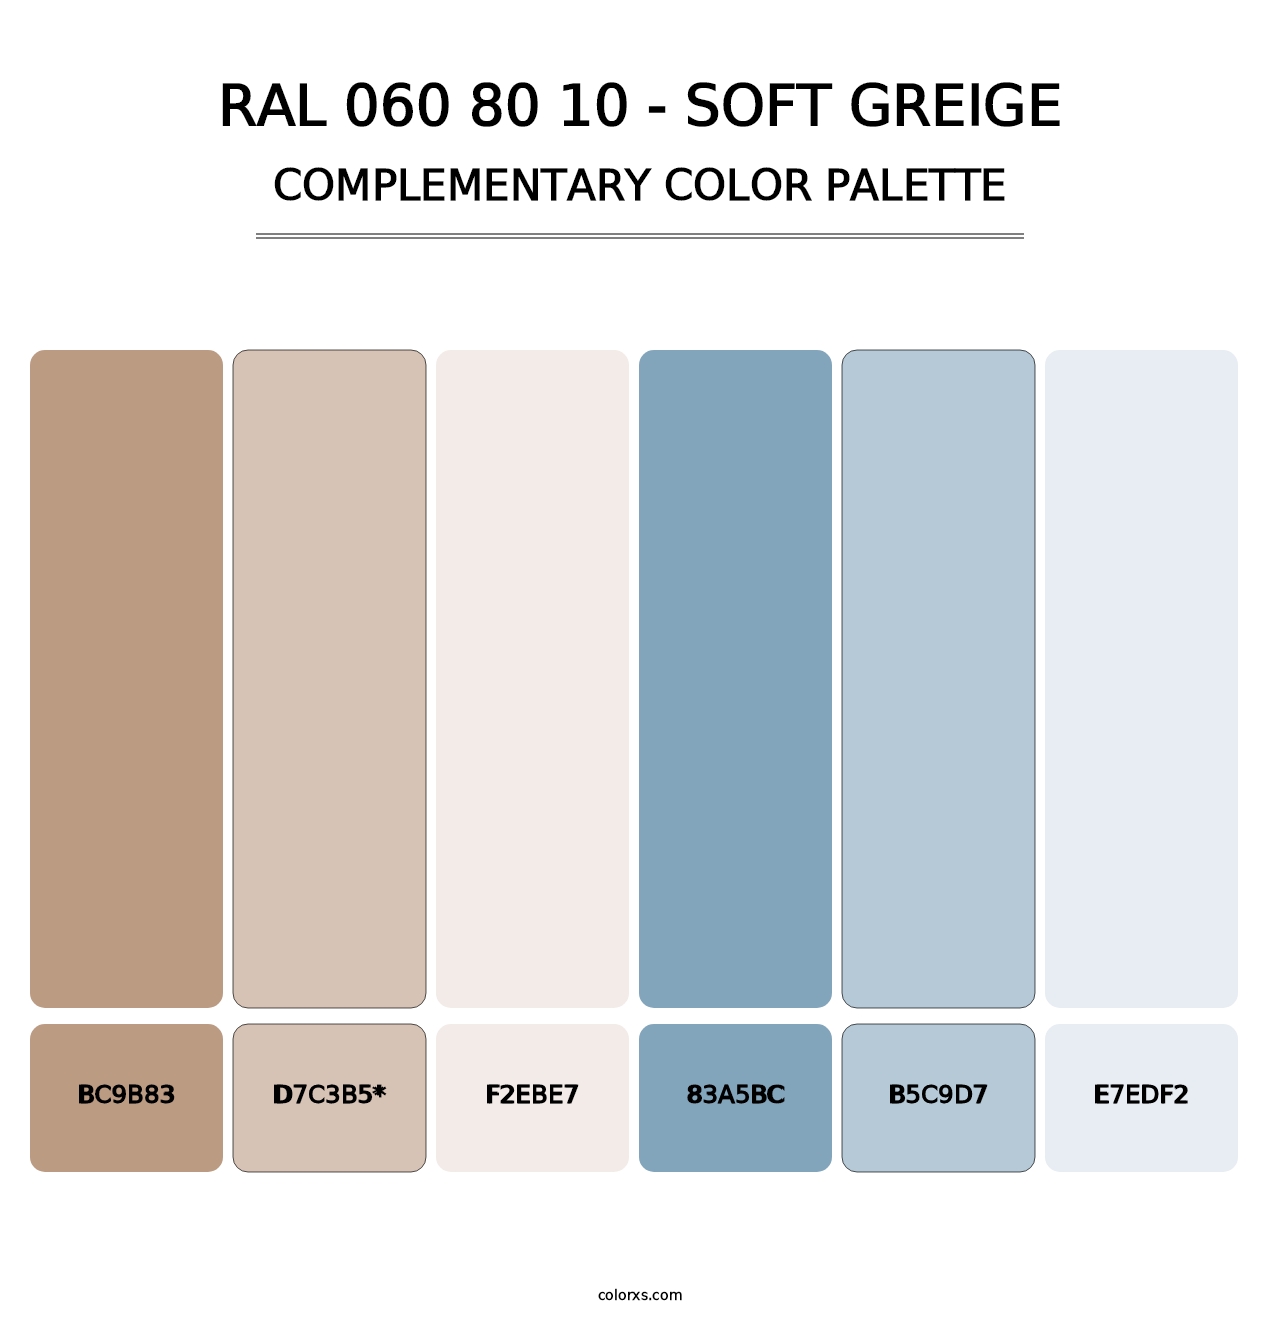 RAL 060 80 10 - Soft Greige - Complementary Color Palette